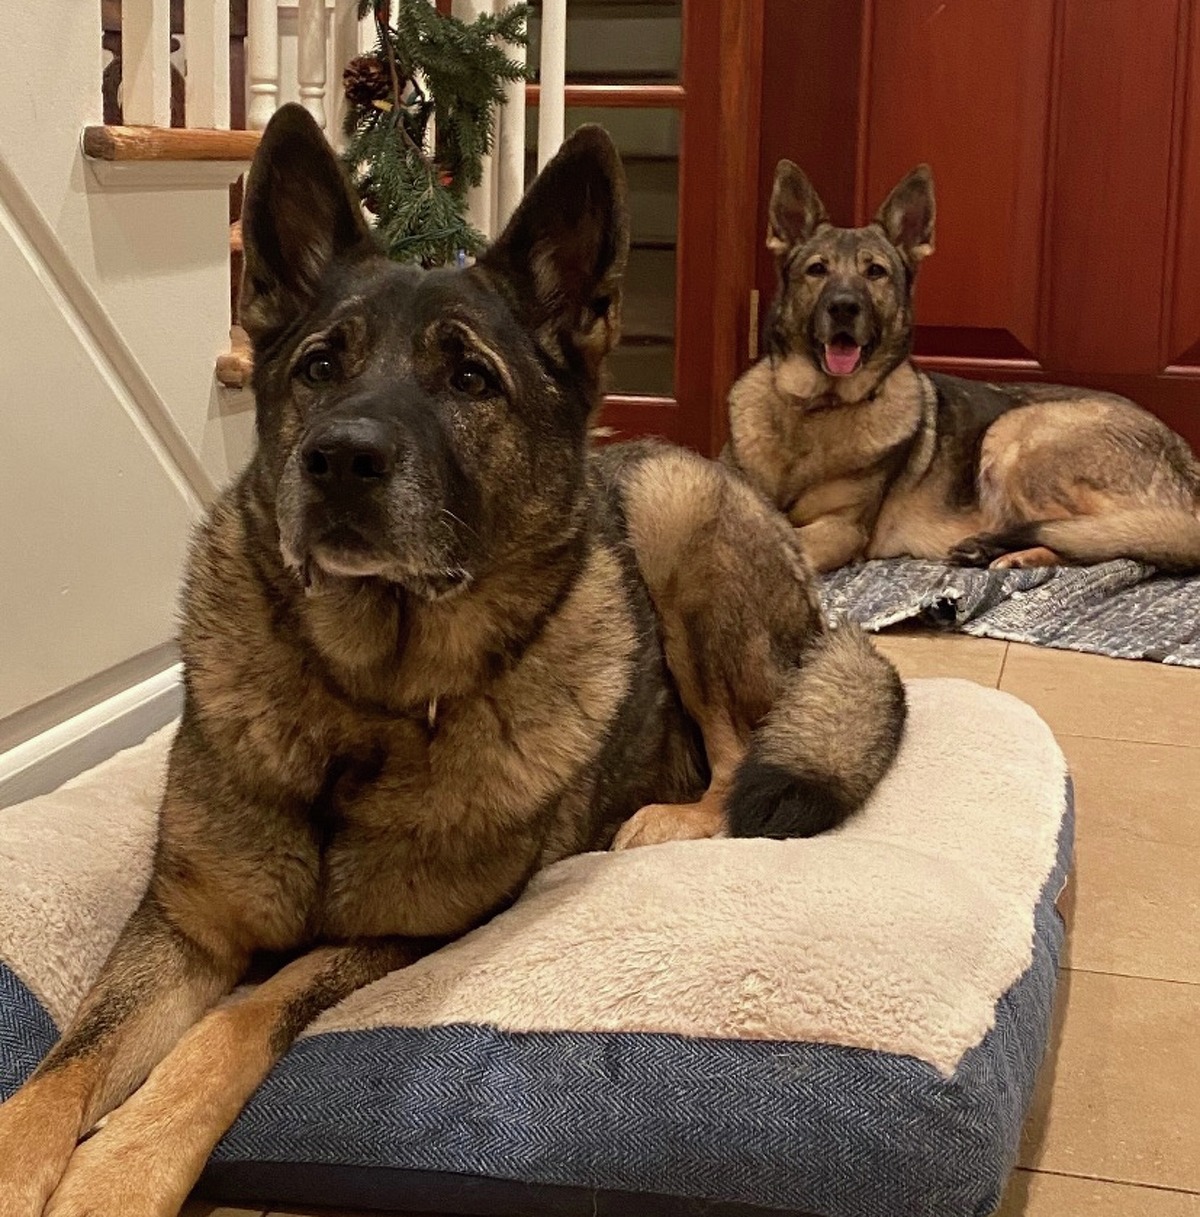 Michael Konschak, of Carmel, N.Y., killed and skinned German Shepherds, Cimo and Lieben, after they escaped their Ridgefield yard in November, according to a warrant for his arrest. 